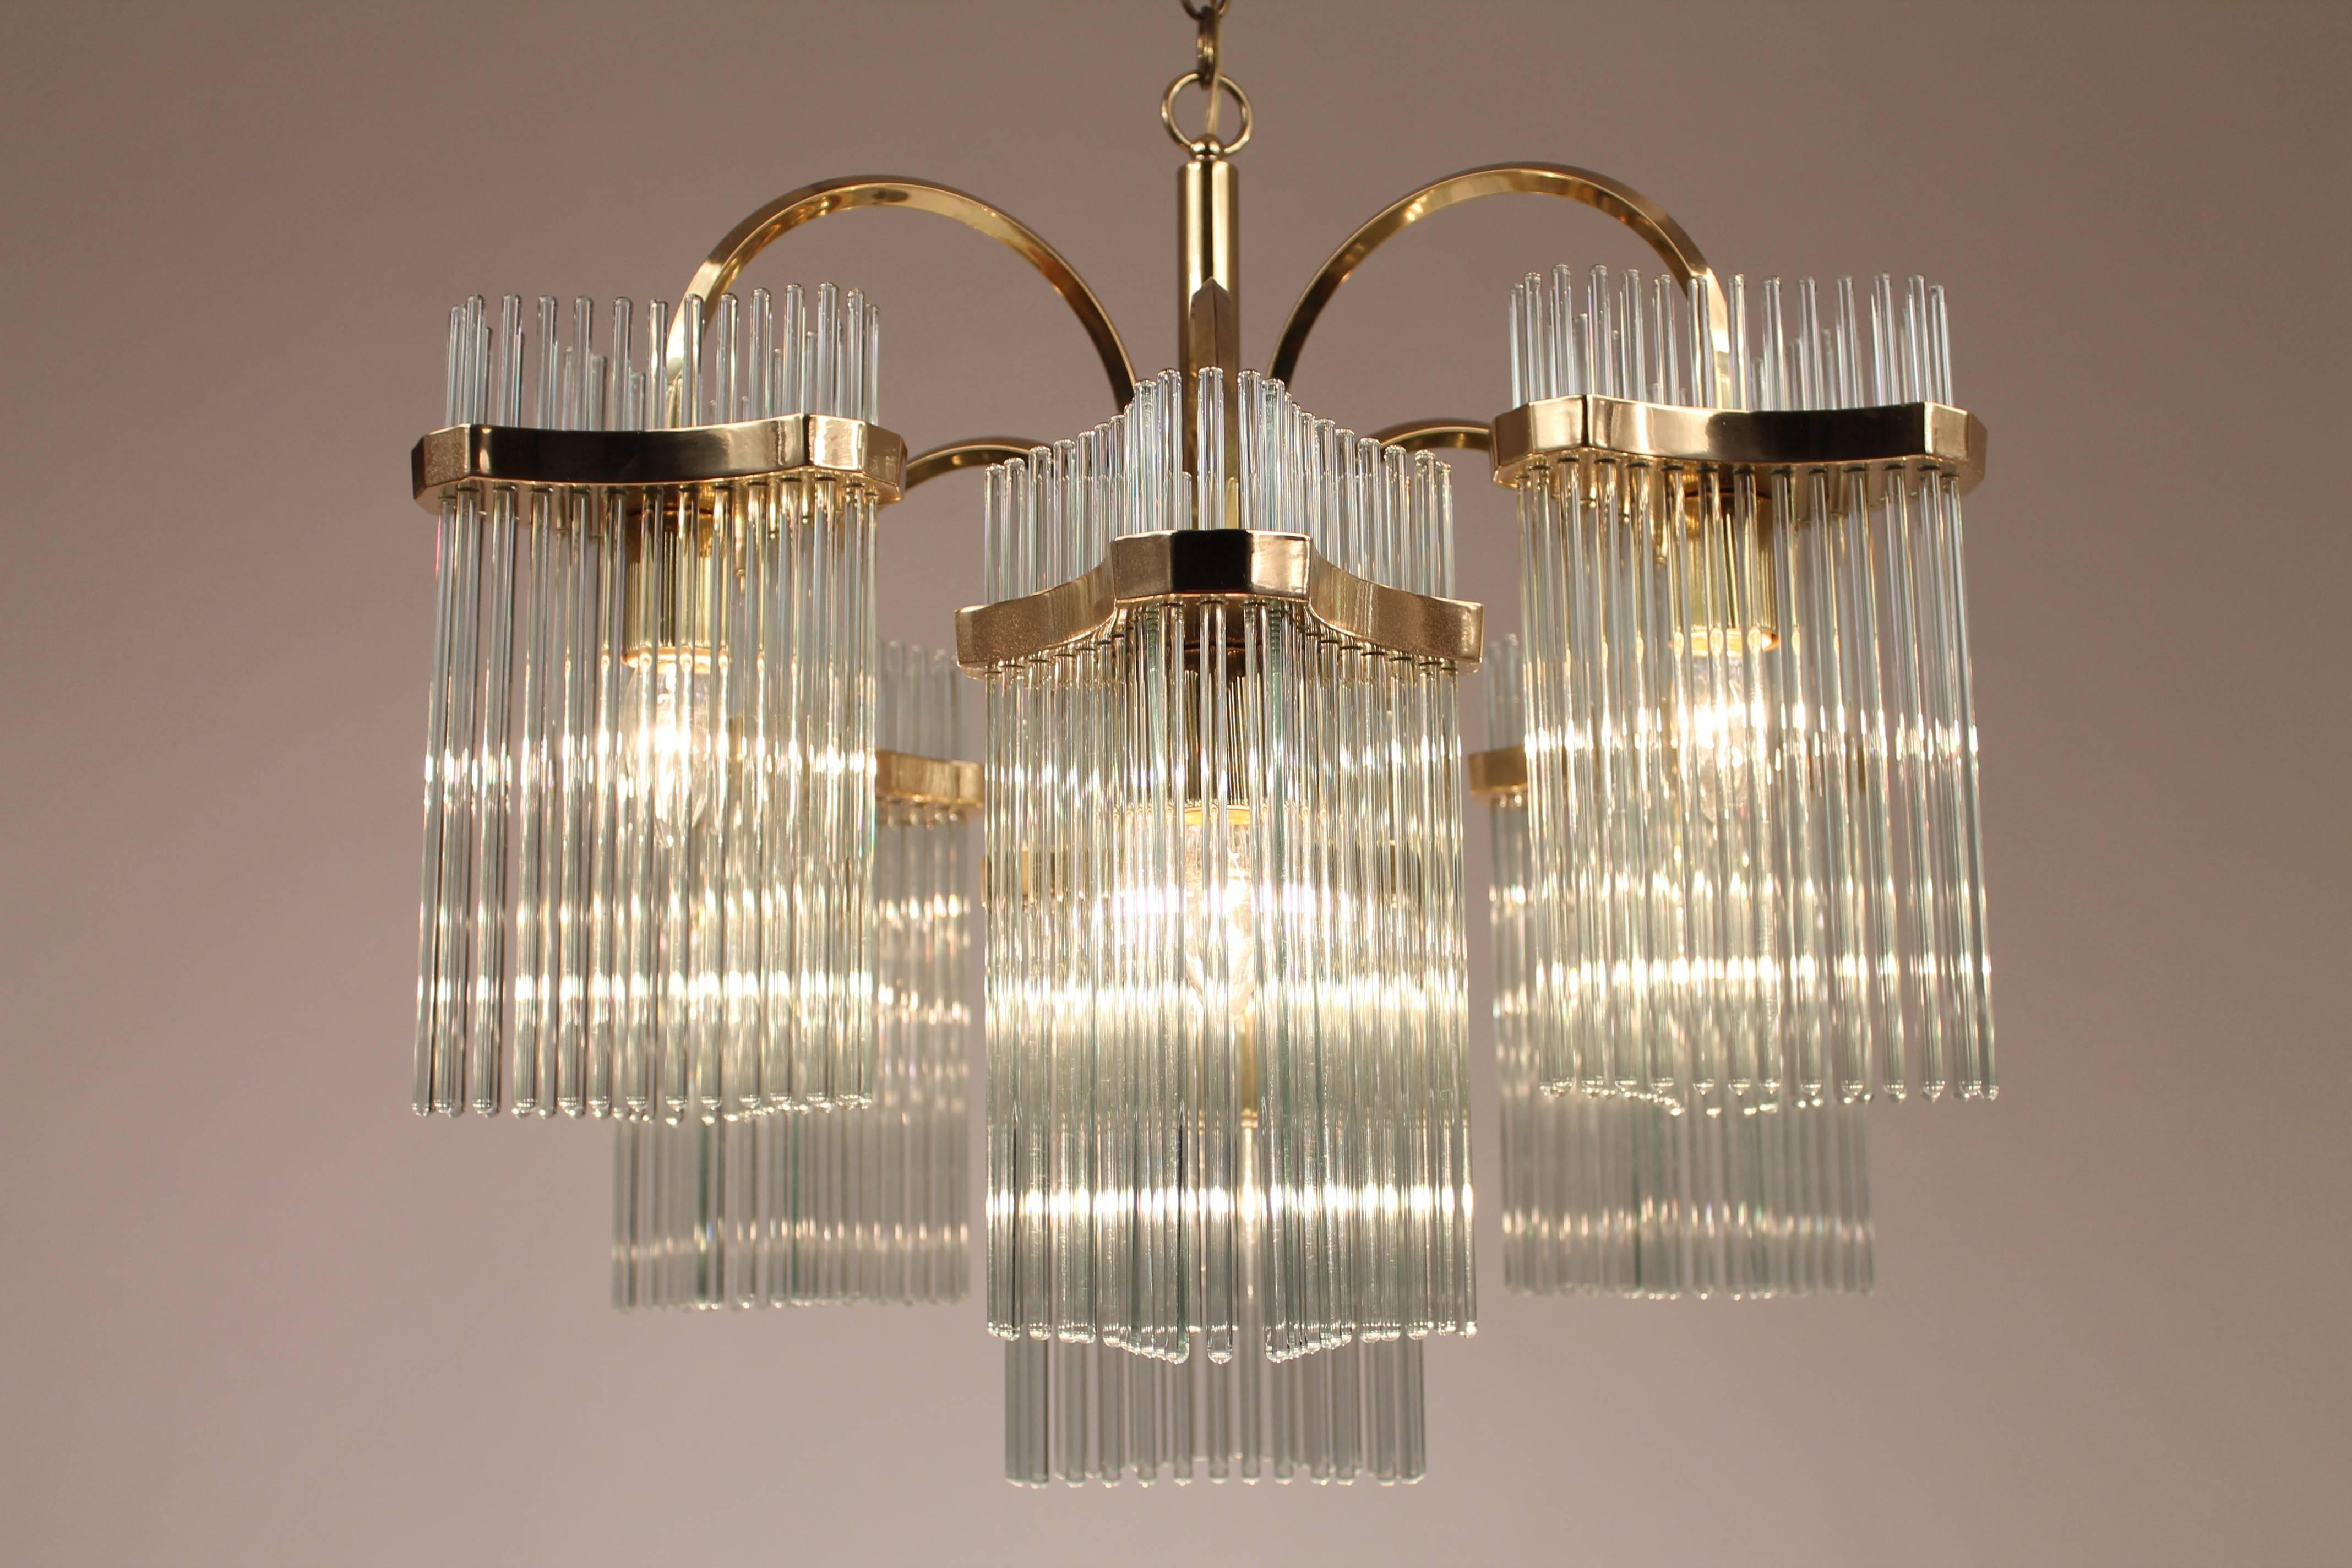 25 pounds of solid  brass and glass rods.

Extremely strudy construction. 

Chandelier is 25 inches at widest point by 22 inches high.

Come with matching canopy .

Socket are regular  north american  E26 size rated at 60 watts each .

We